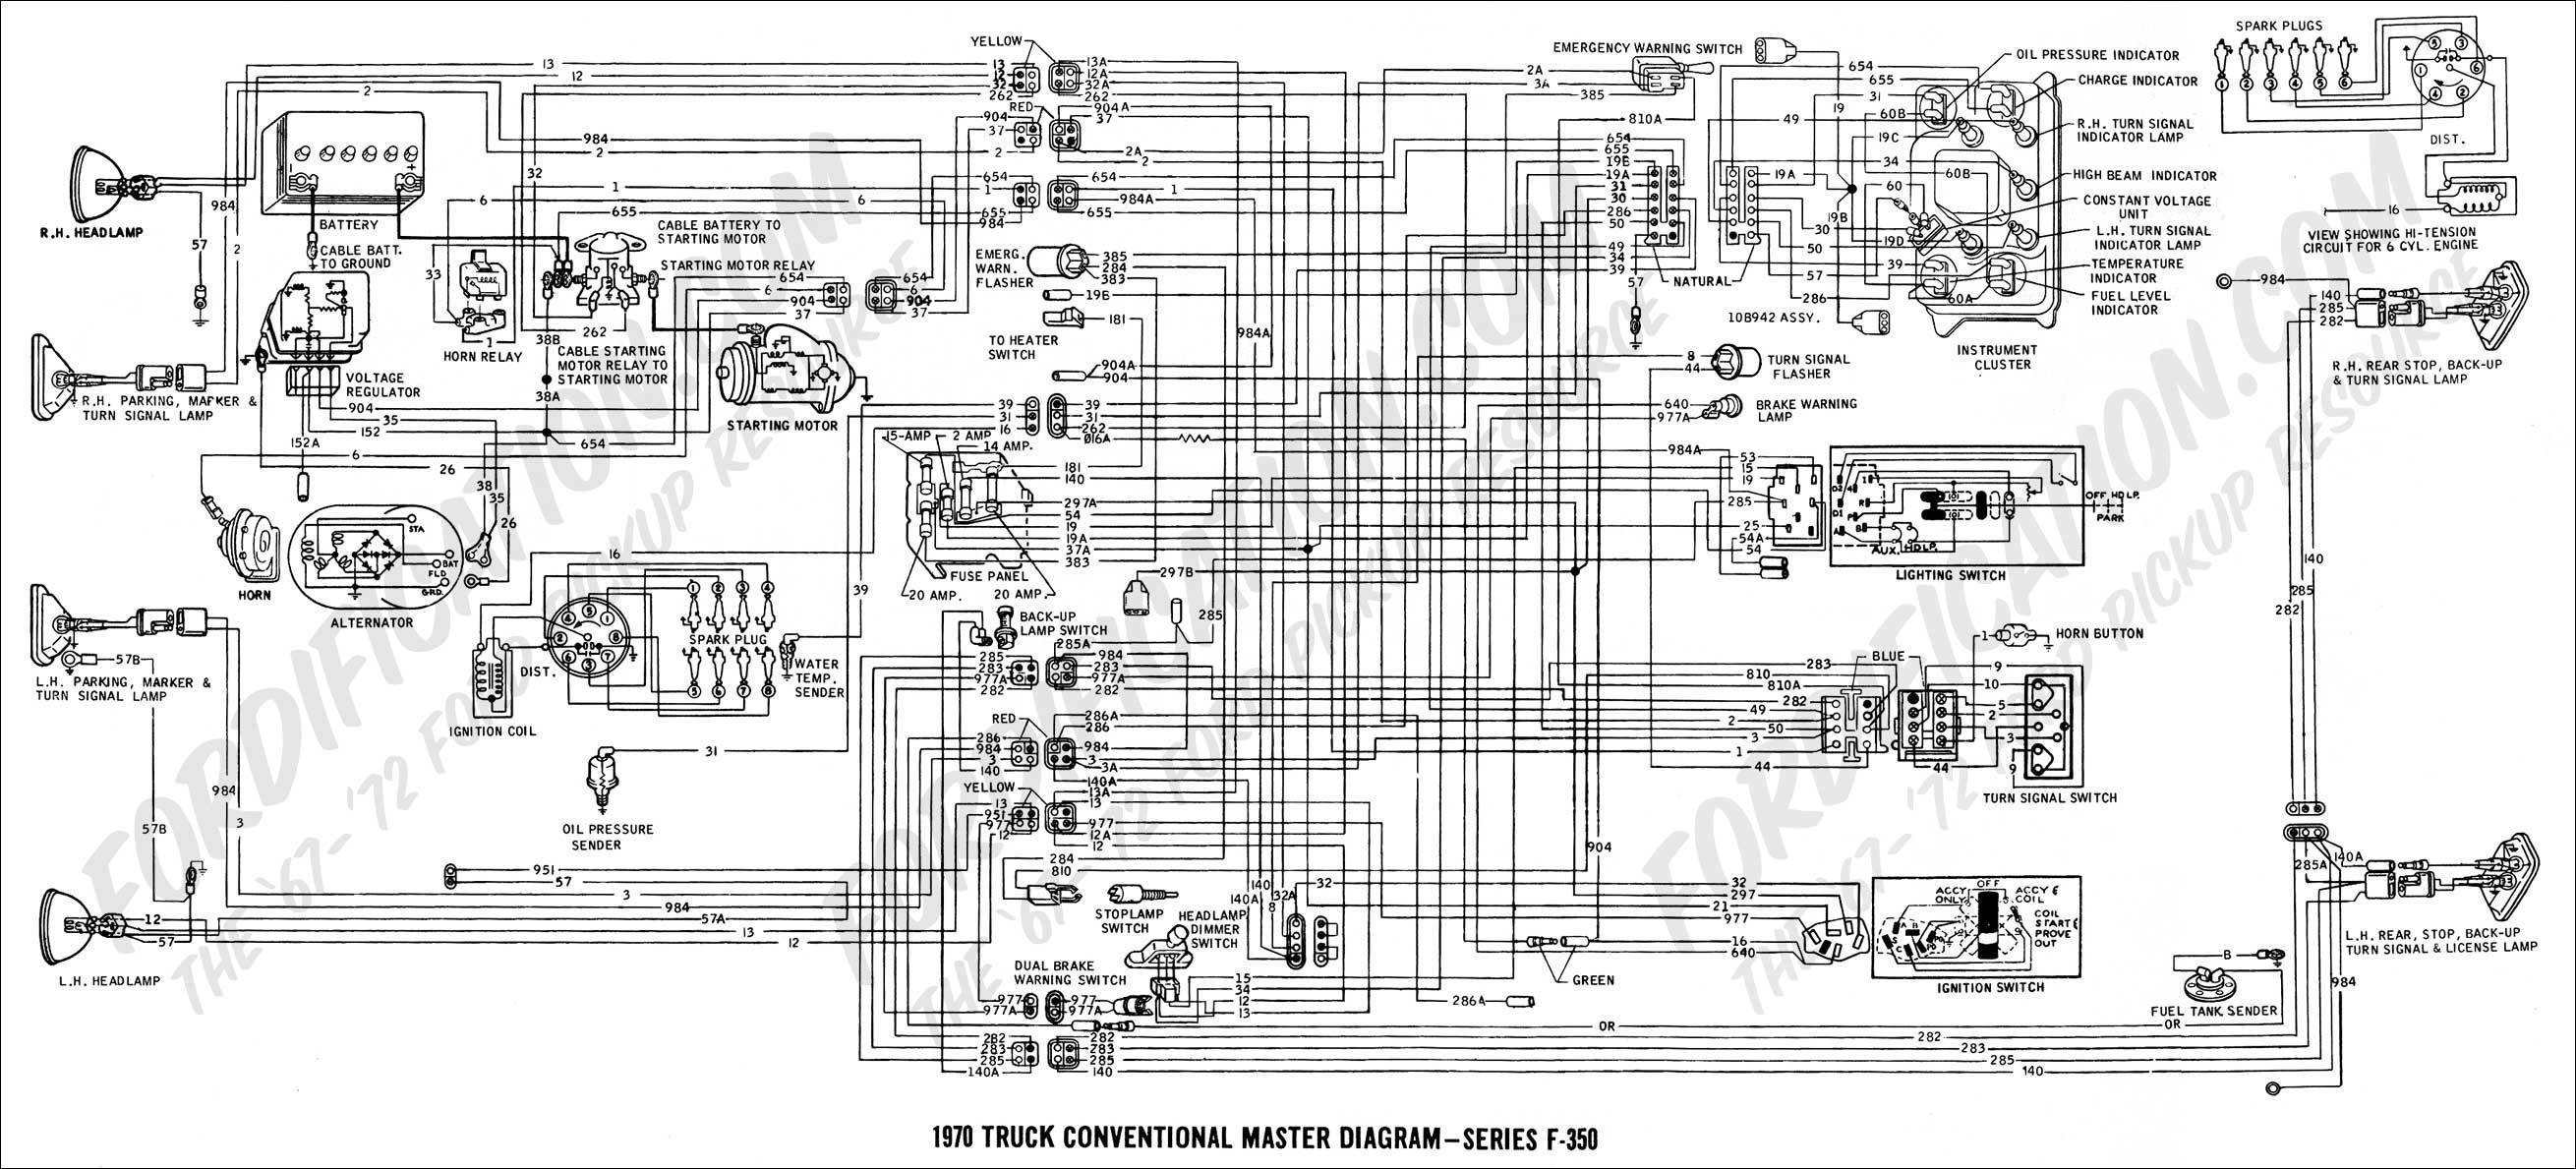 2017 ford Upfitter Switches Wiring Diagram New 2012 F350 Wiring Diagram Wiring Diagrams